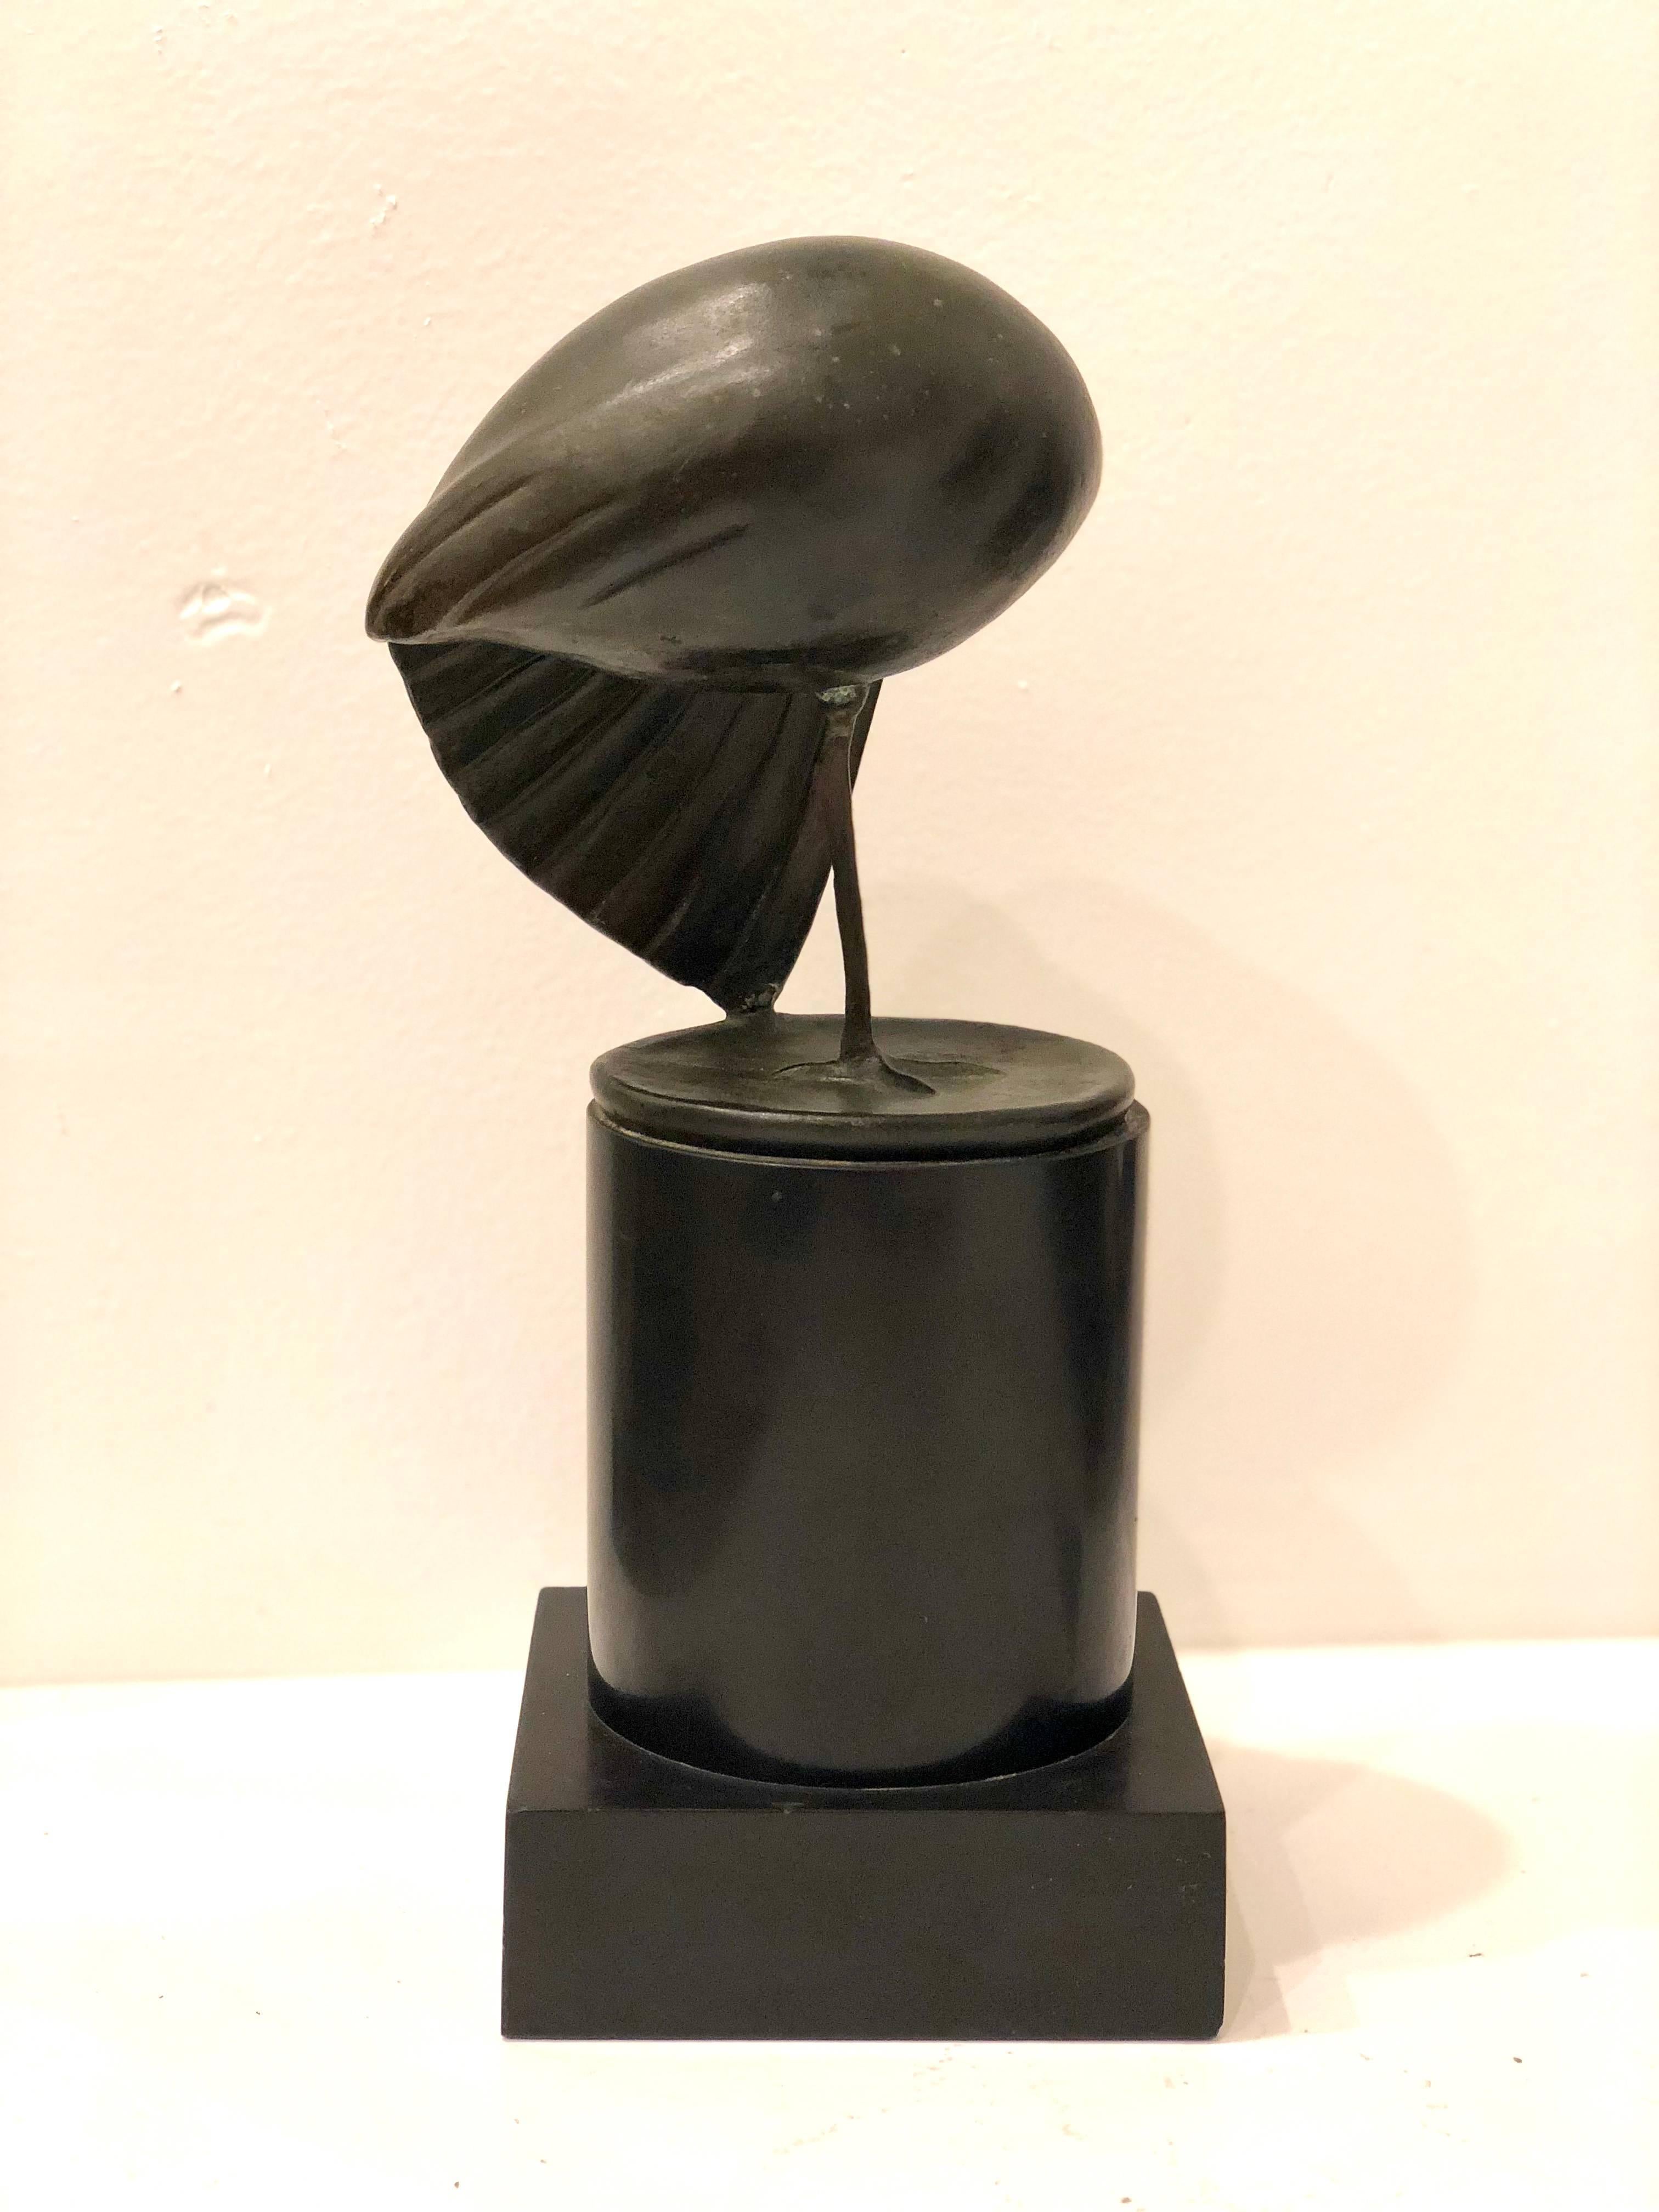 Beautiful bronze sculpture sitting on solid black granite base, of standing bird on one leg stamped with foundry marks, circa 1960s.